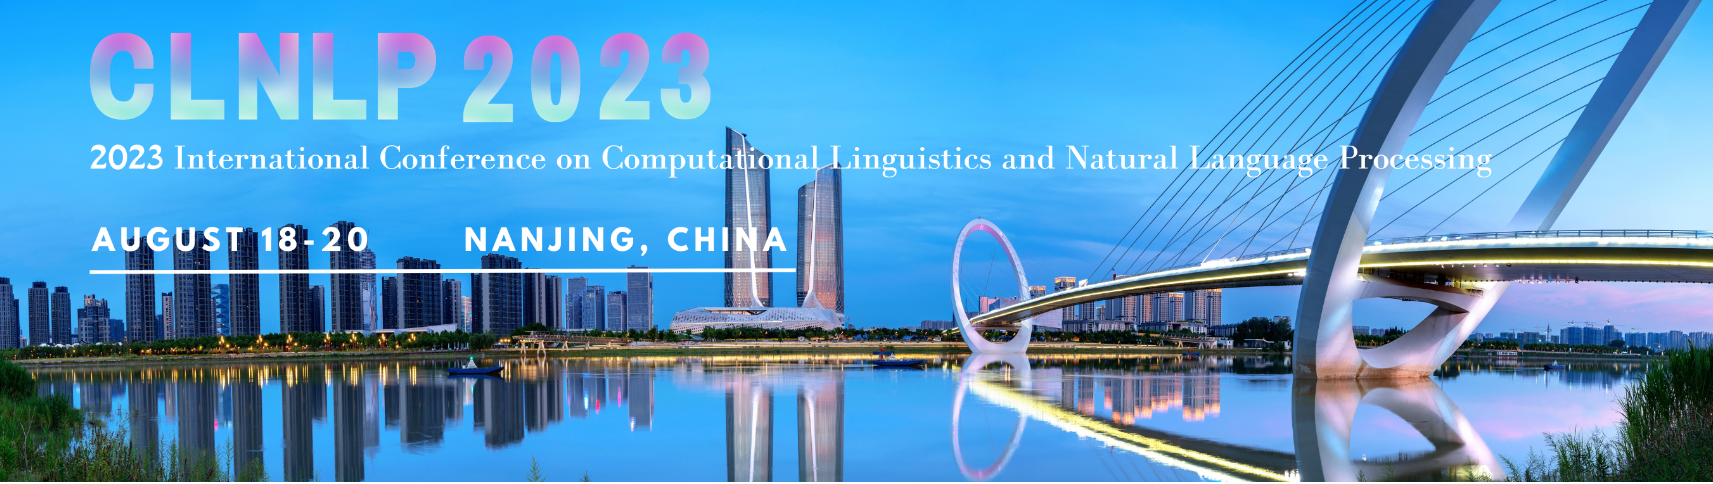 2023 4th International Conference on Computational Linguistics and Natural Language Processing (CLNLP 2023)